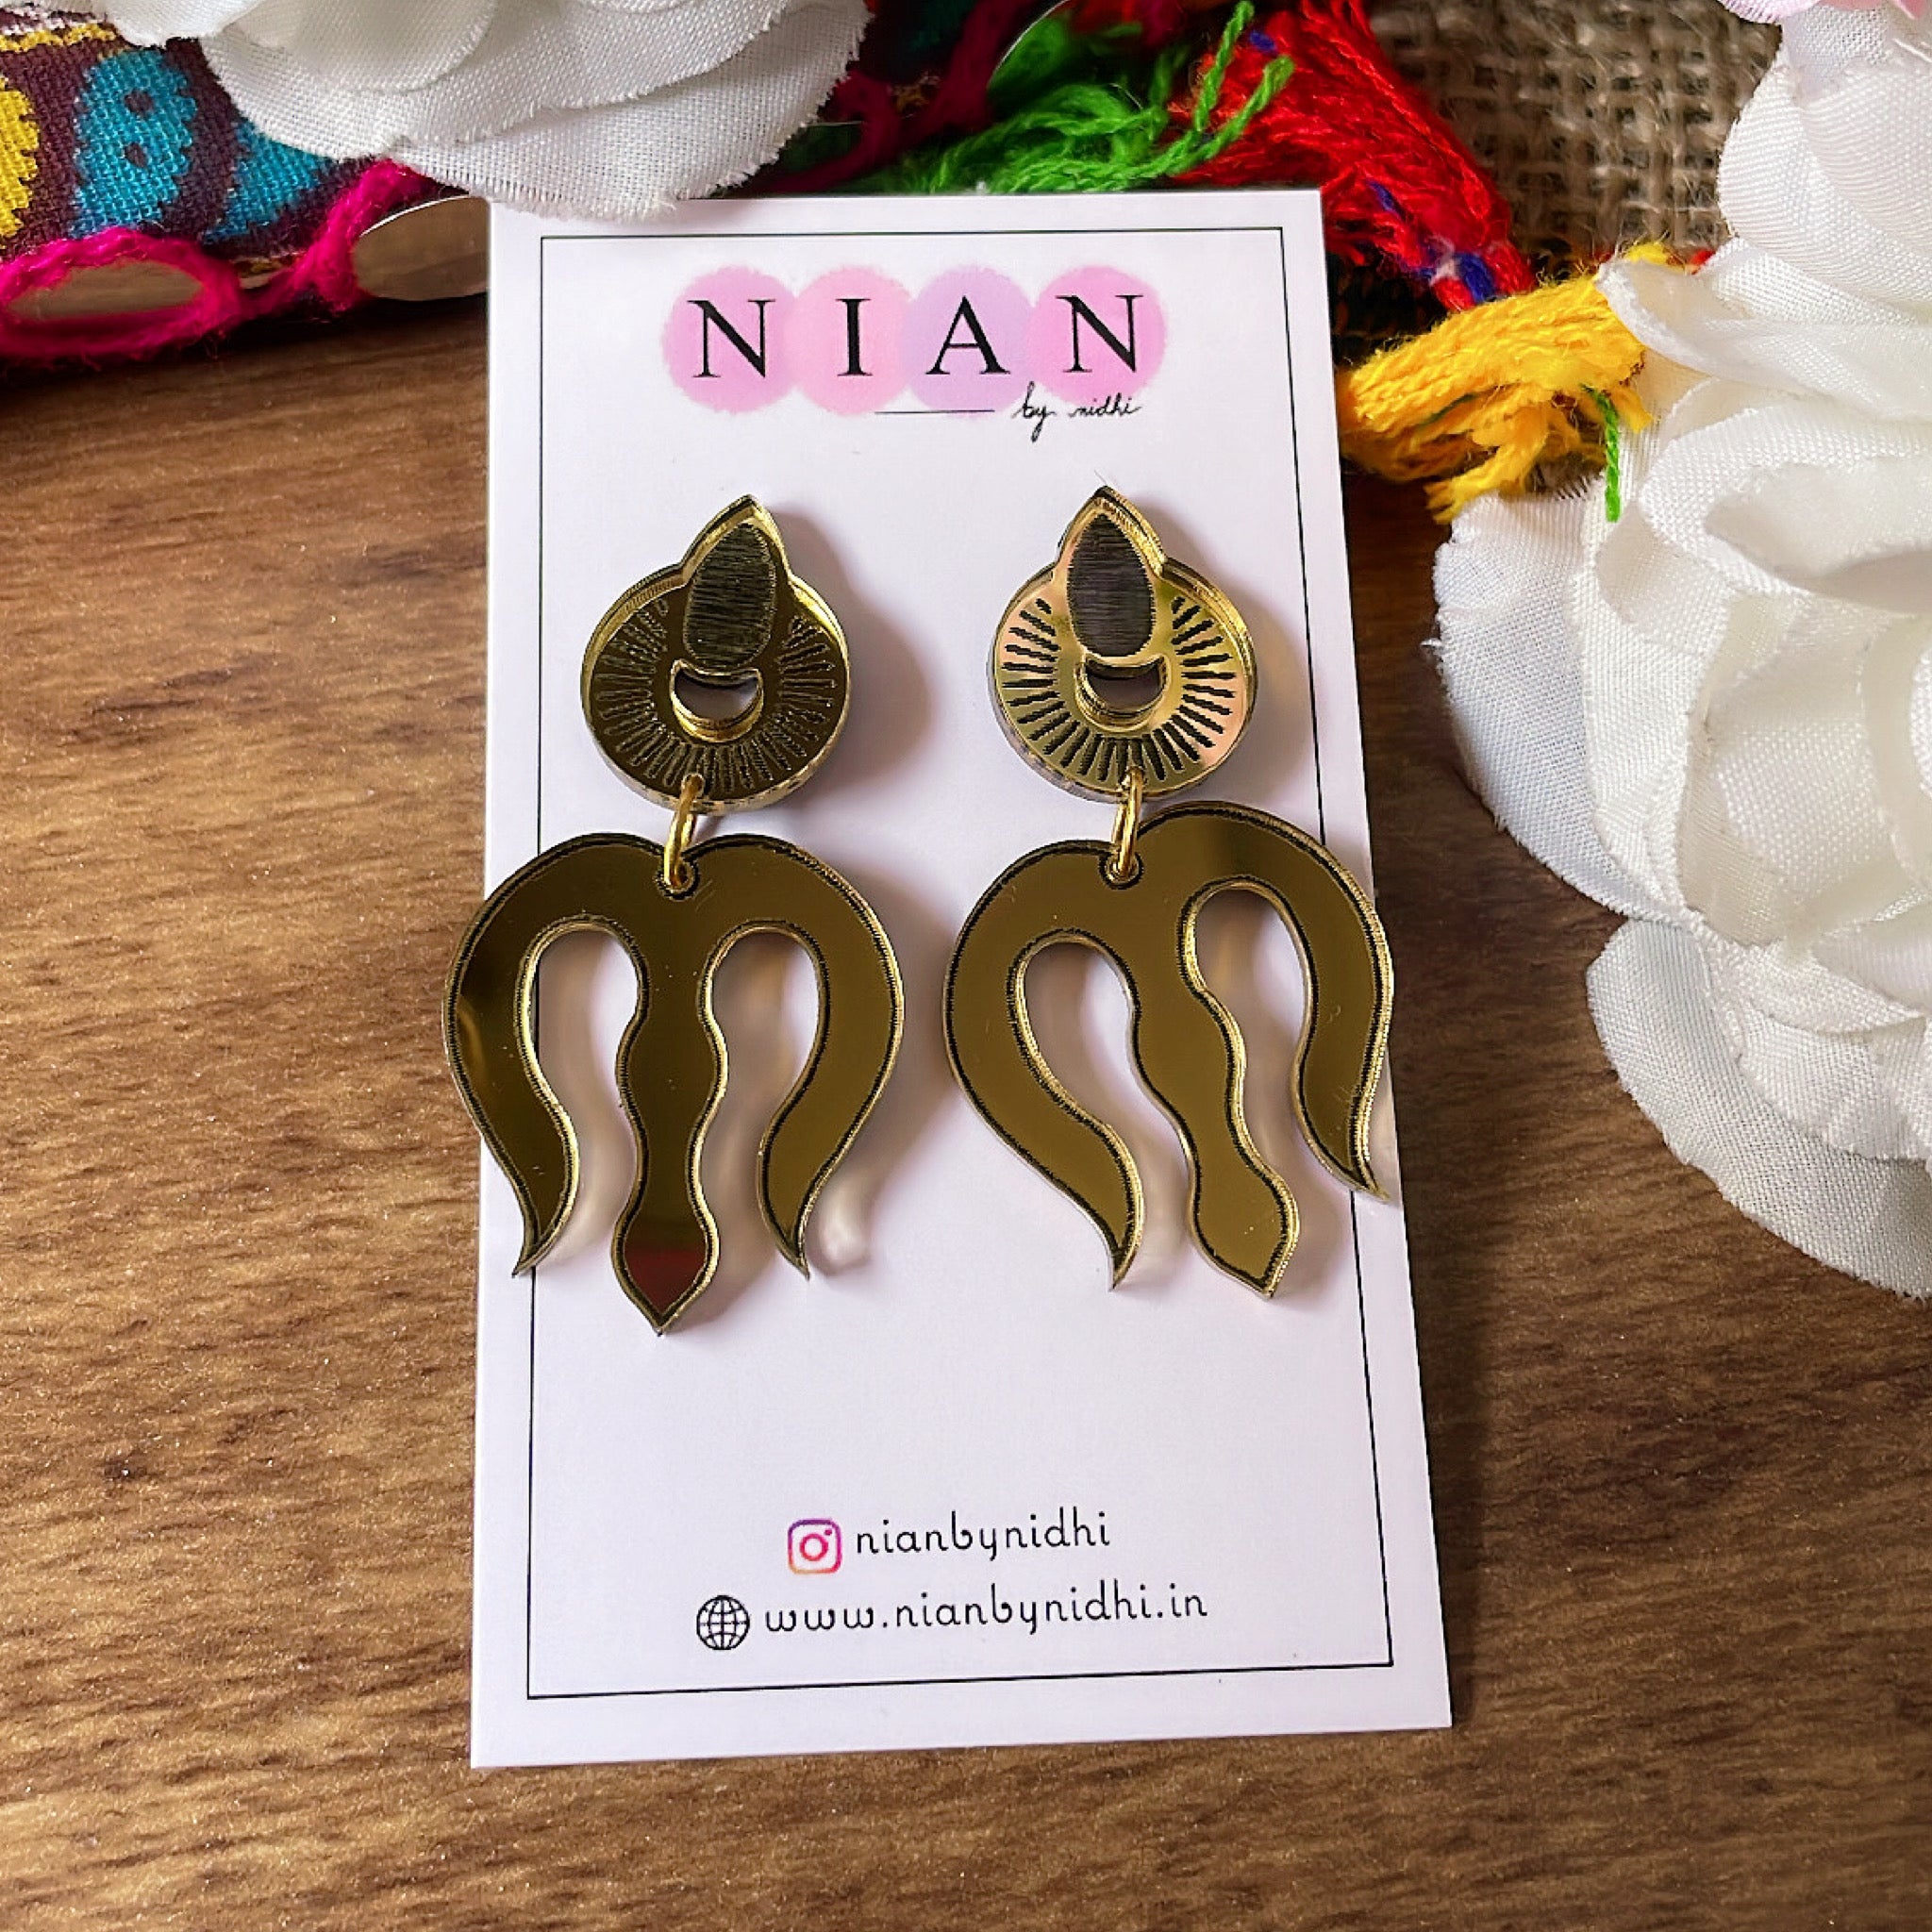 Trishul Earrings - Nian by Nidhi - Glassy Golden - placed in a brown and colorful background